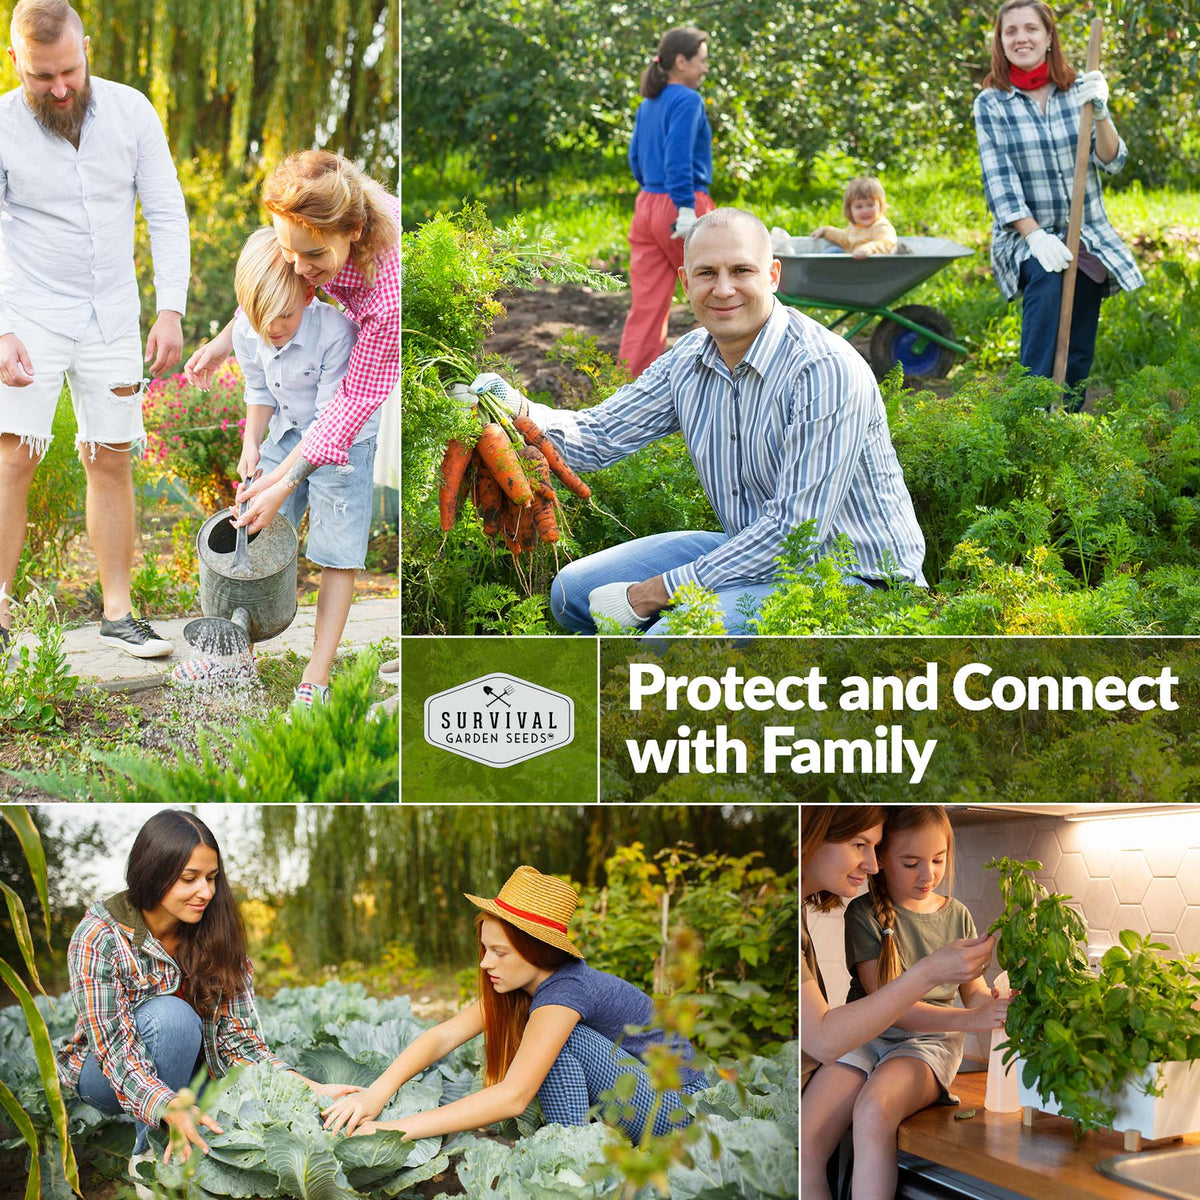 Protect and connect to family in the garden